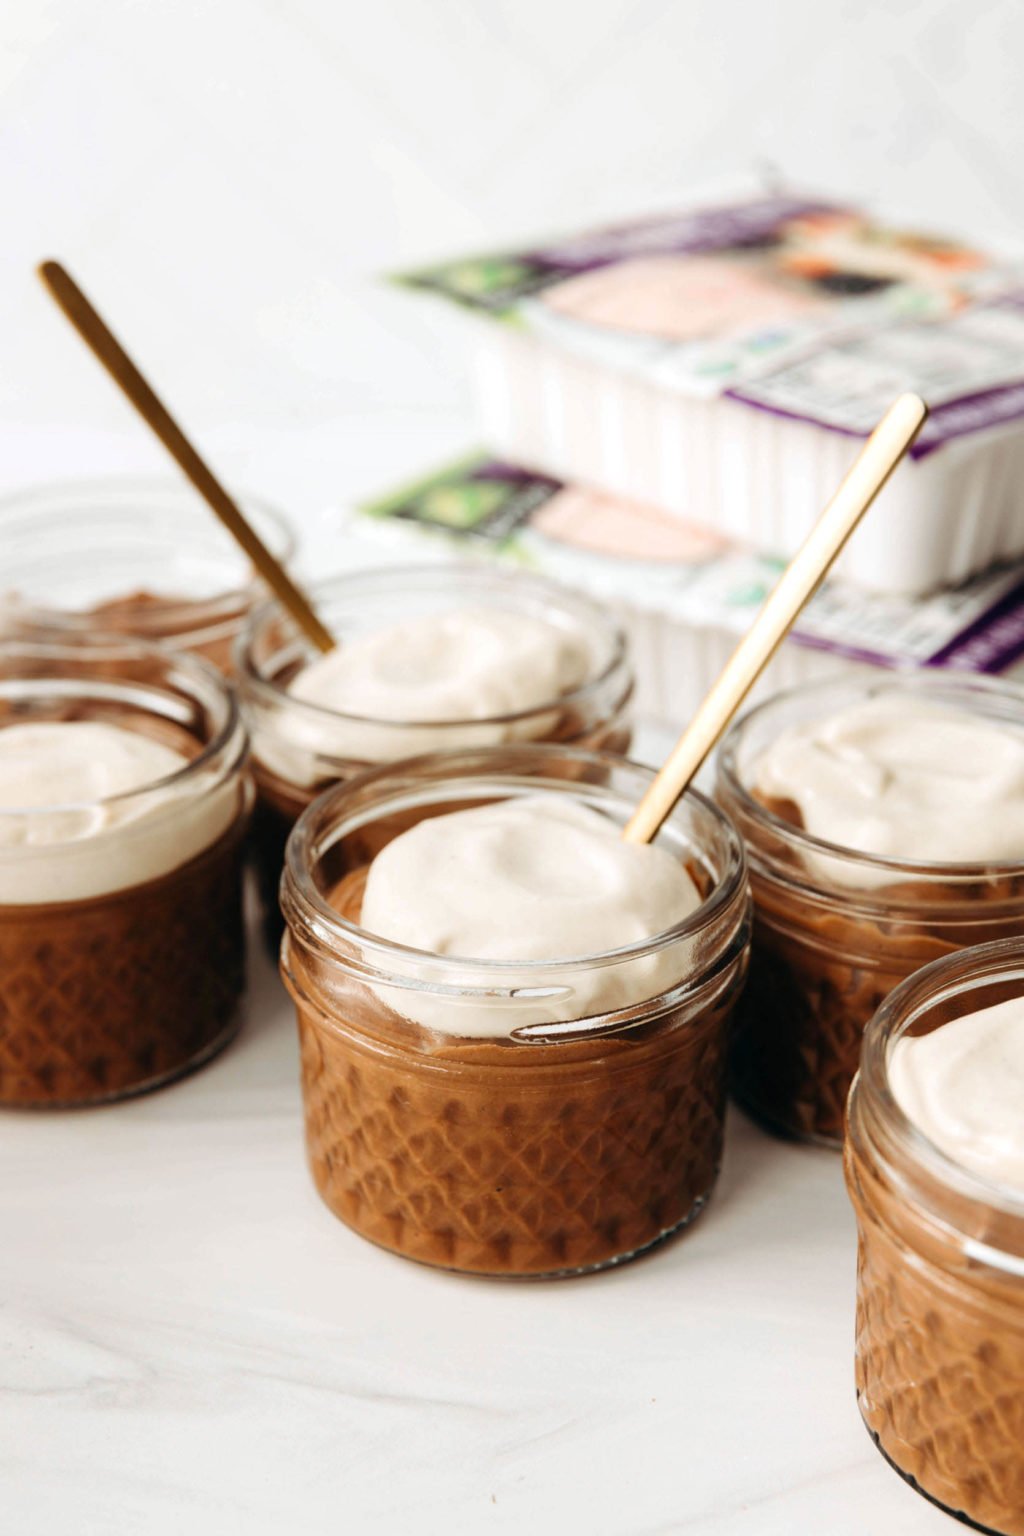 A number of small, round glass jars have been filled with chocolate pudding and a dollop of white cream. Two golden spoons are sticking out from two of the jars.